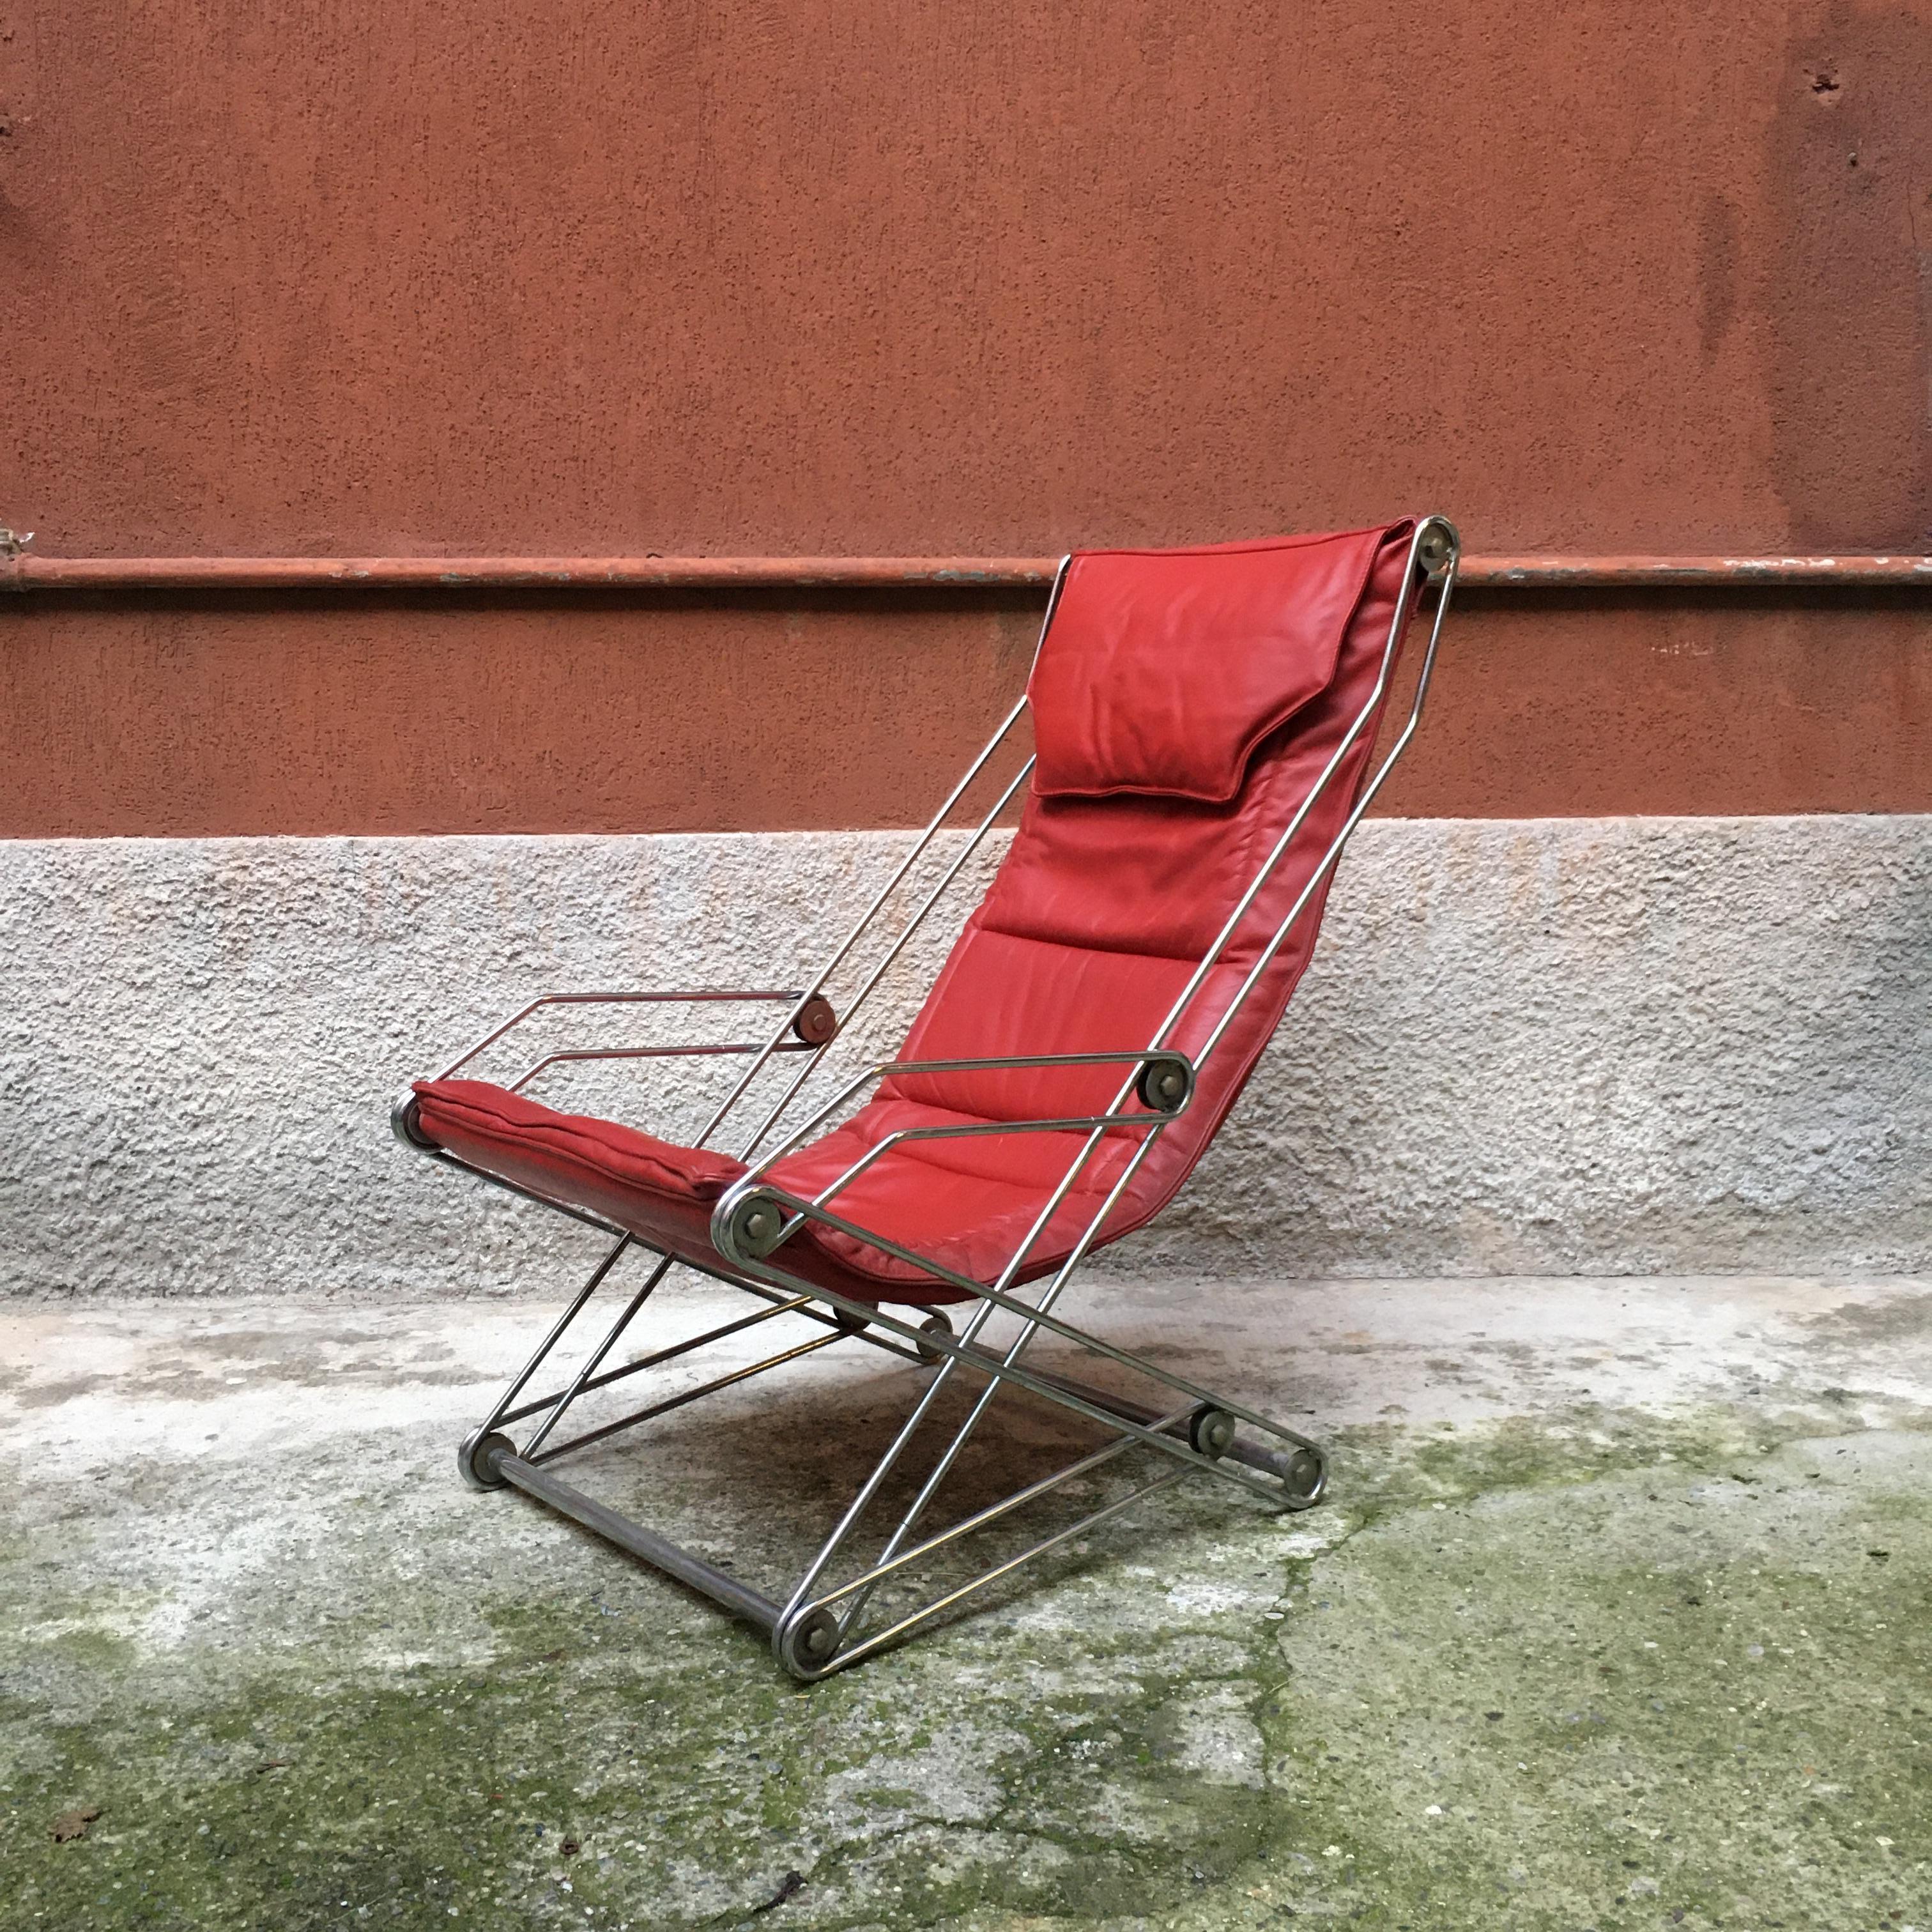 Italian red and chromed steel red armchair, 1970s
Red folding armchair with chromed steel rod structure with adjustable extension
and with original cushion in red sky
Good conditions.